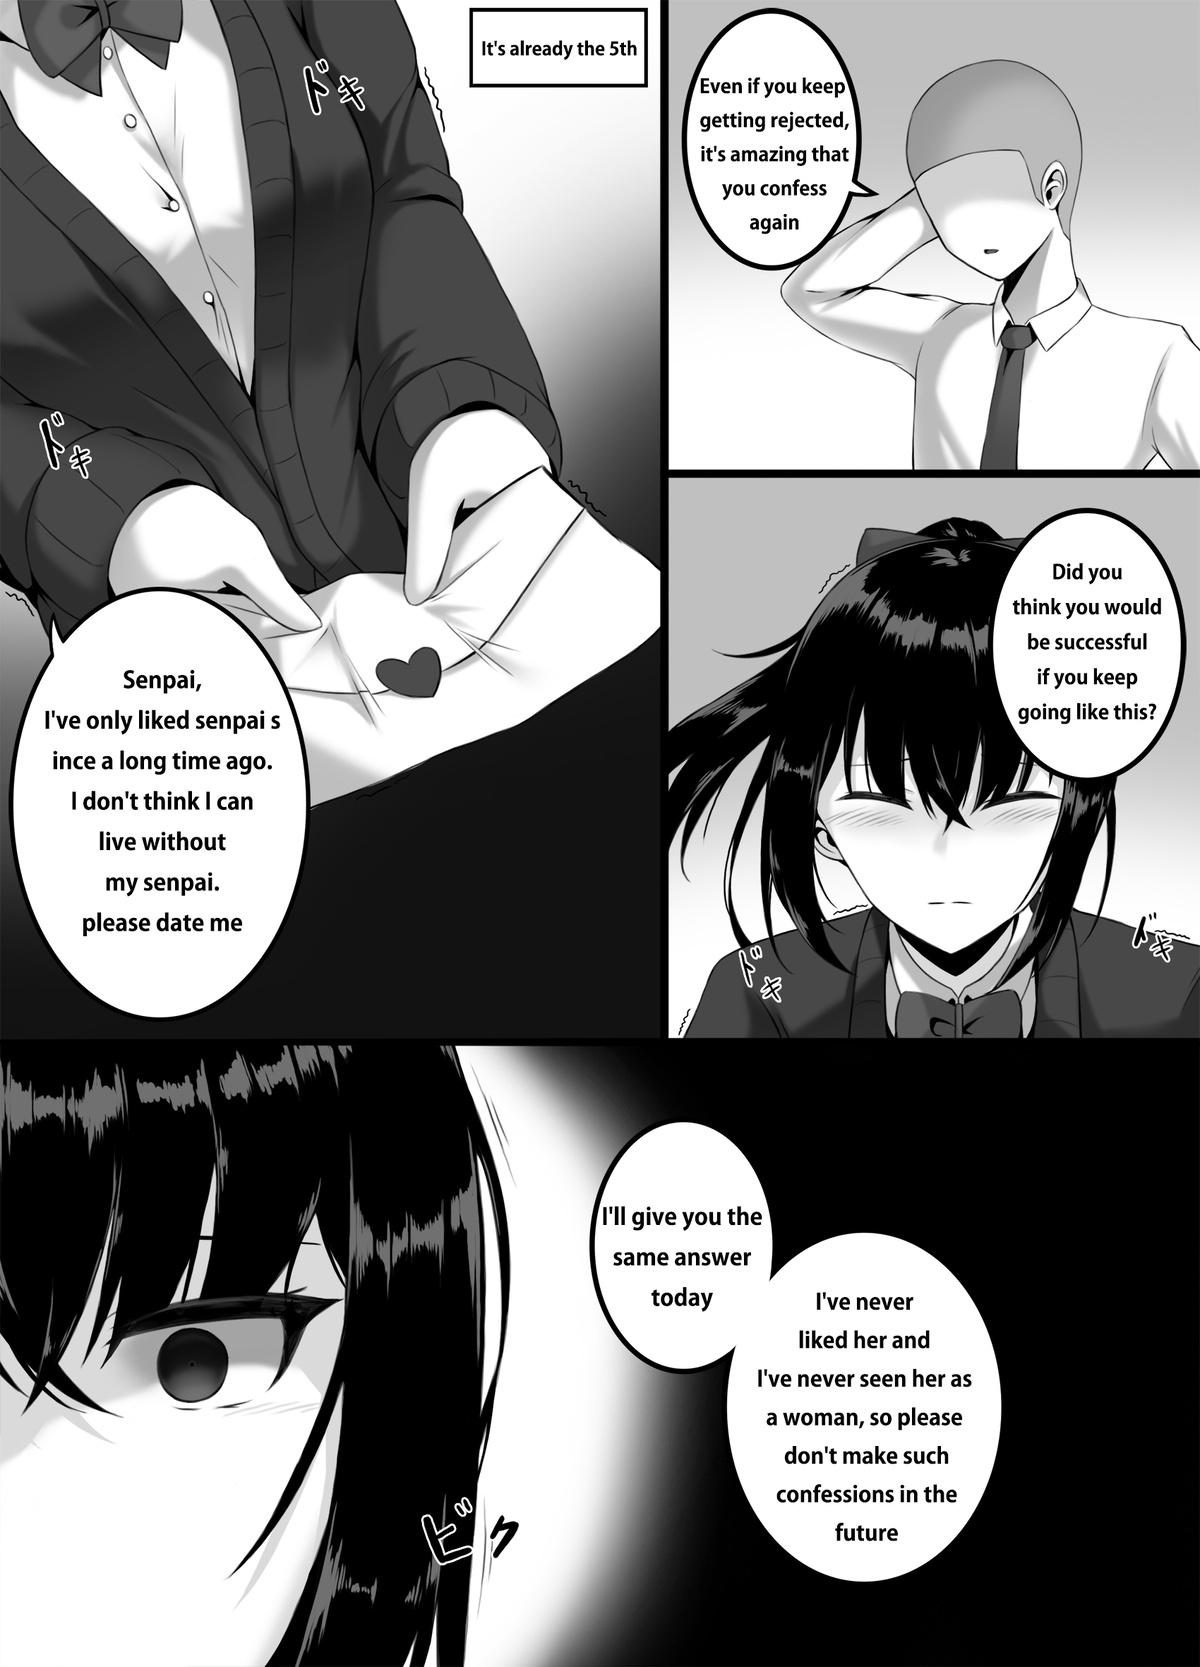 Beauty Yandere girl 1-2 Peeing - Page 1